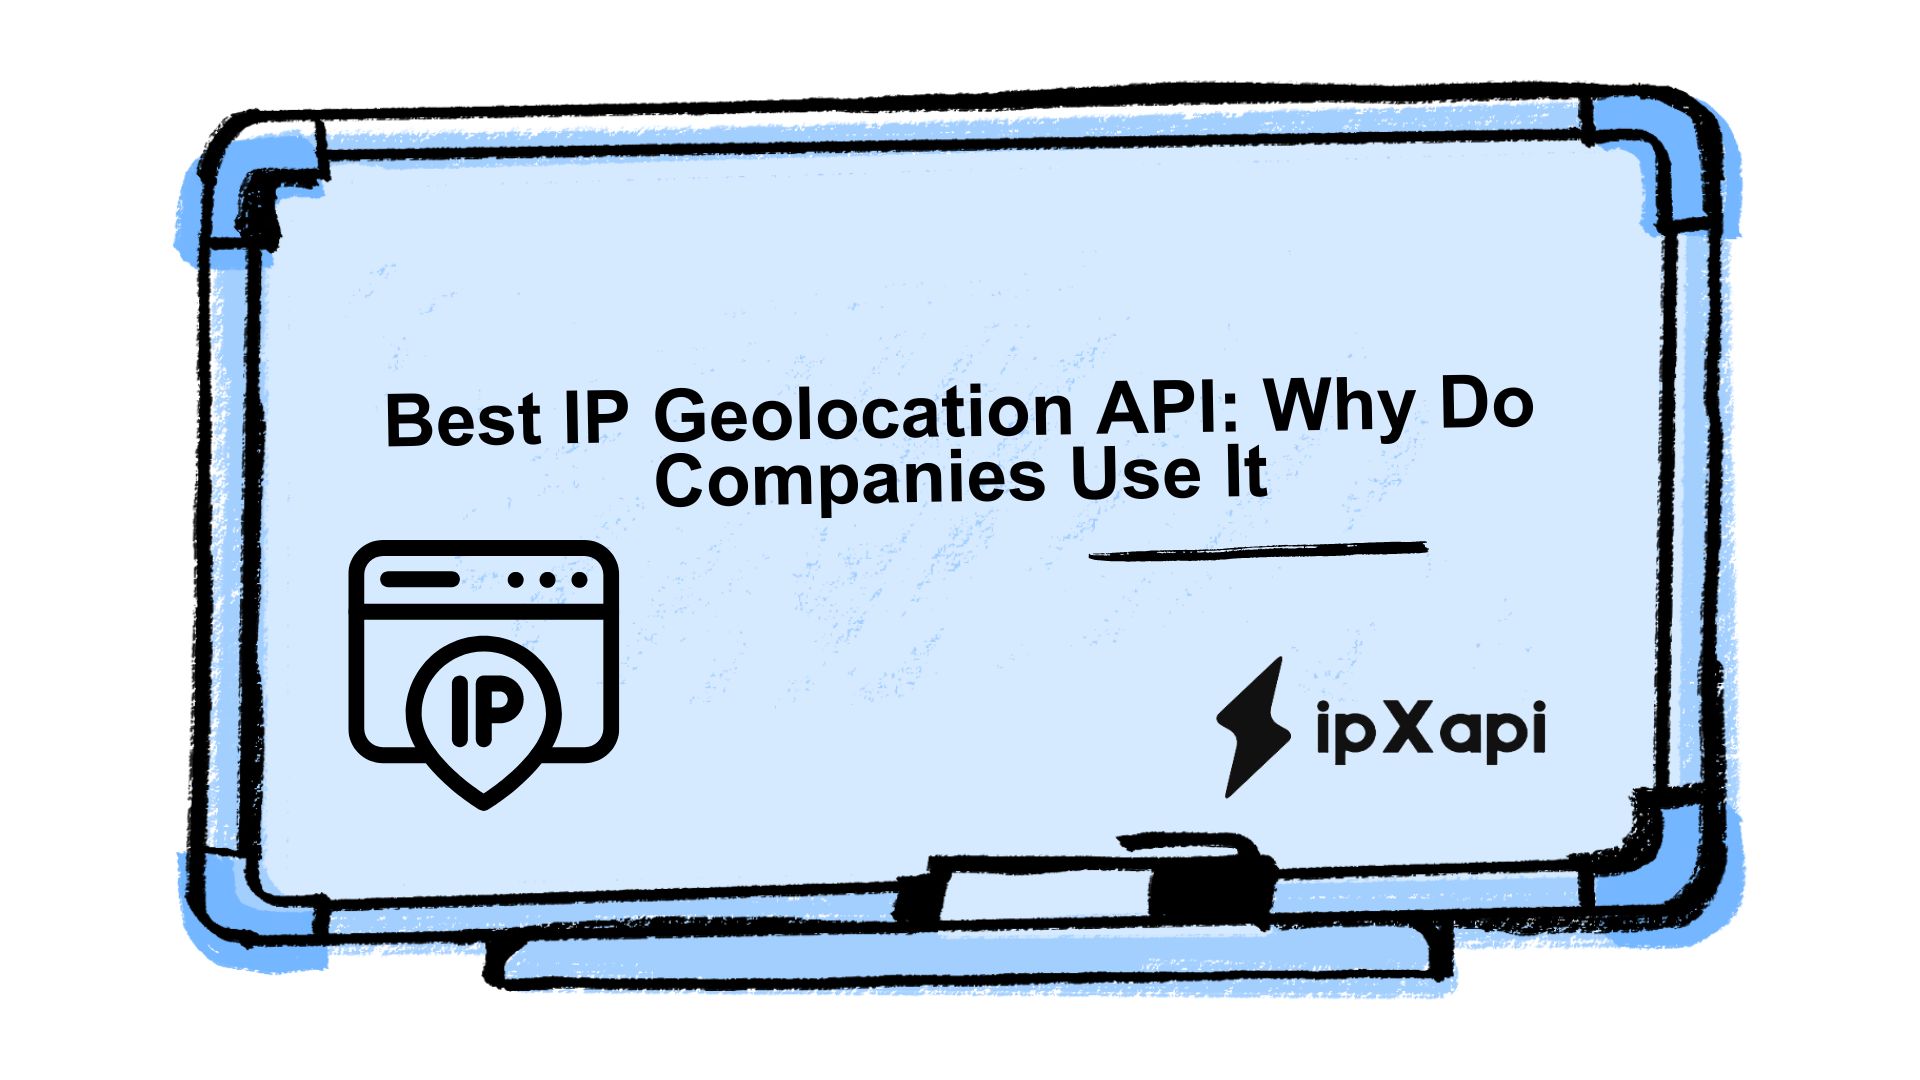 Best IP Geolocation API: Why Do Companies Use It